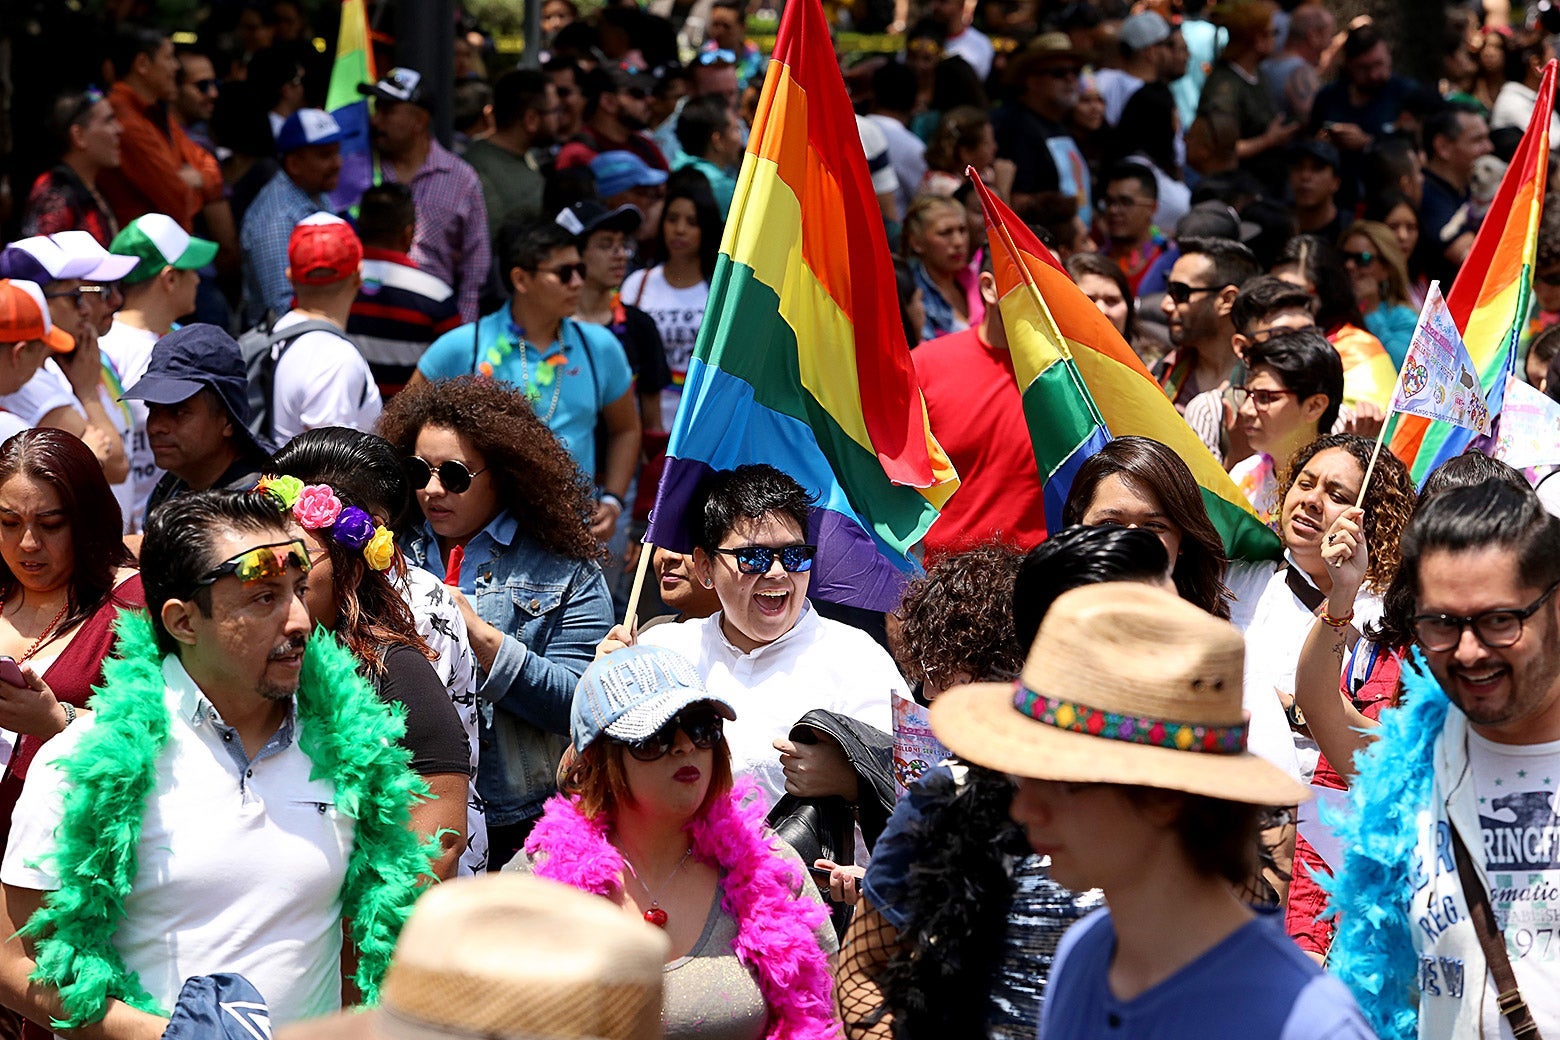 People walk and dance during a Pride parade in Mexico City.